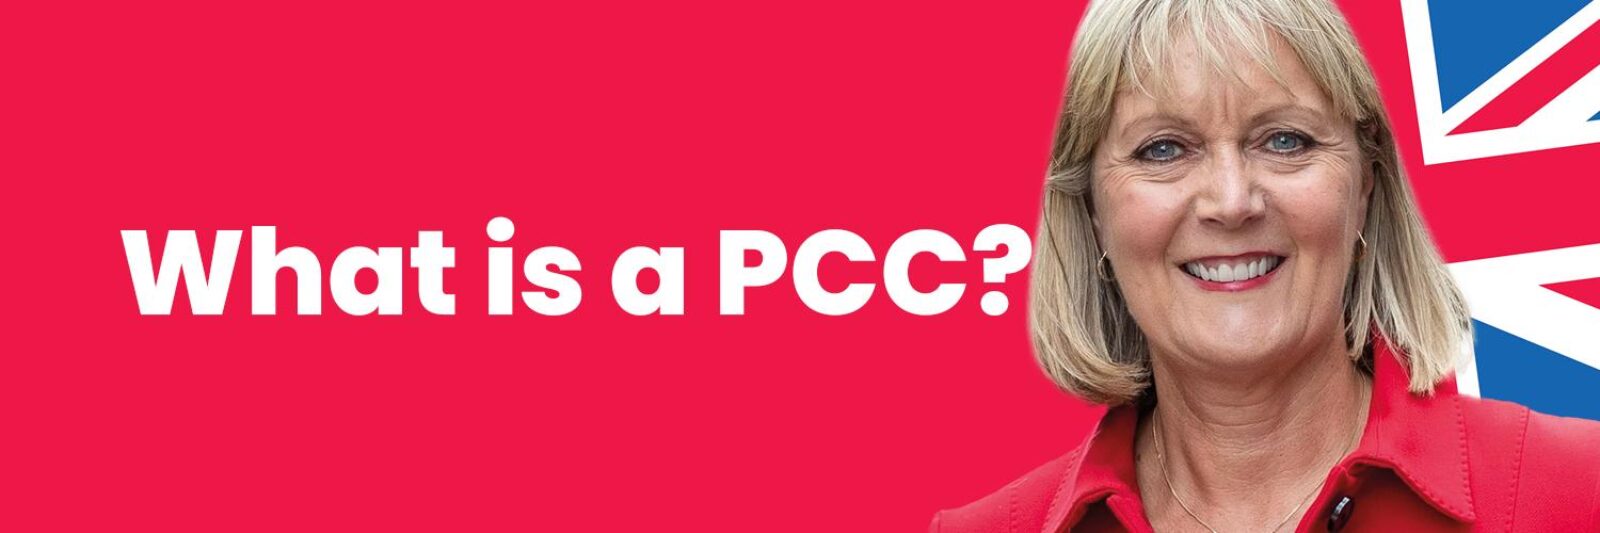 What is a PCC